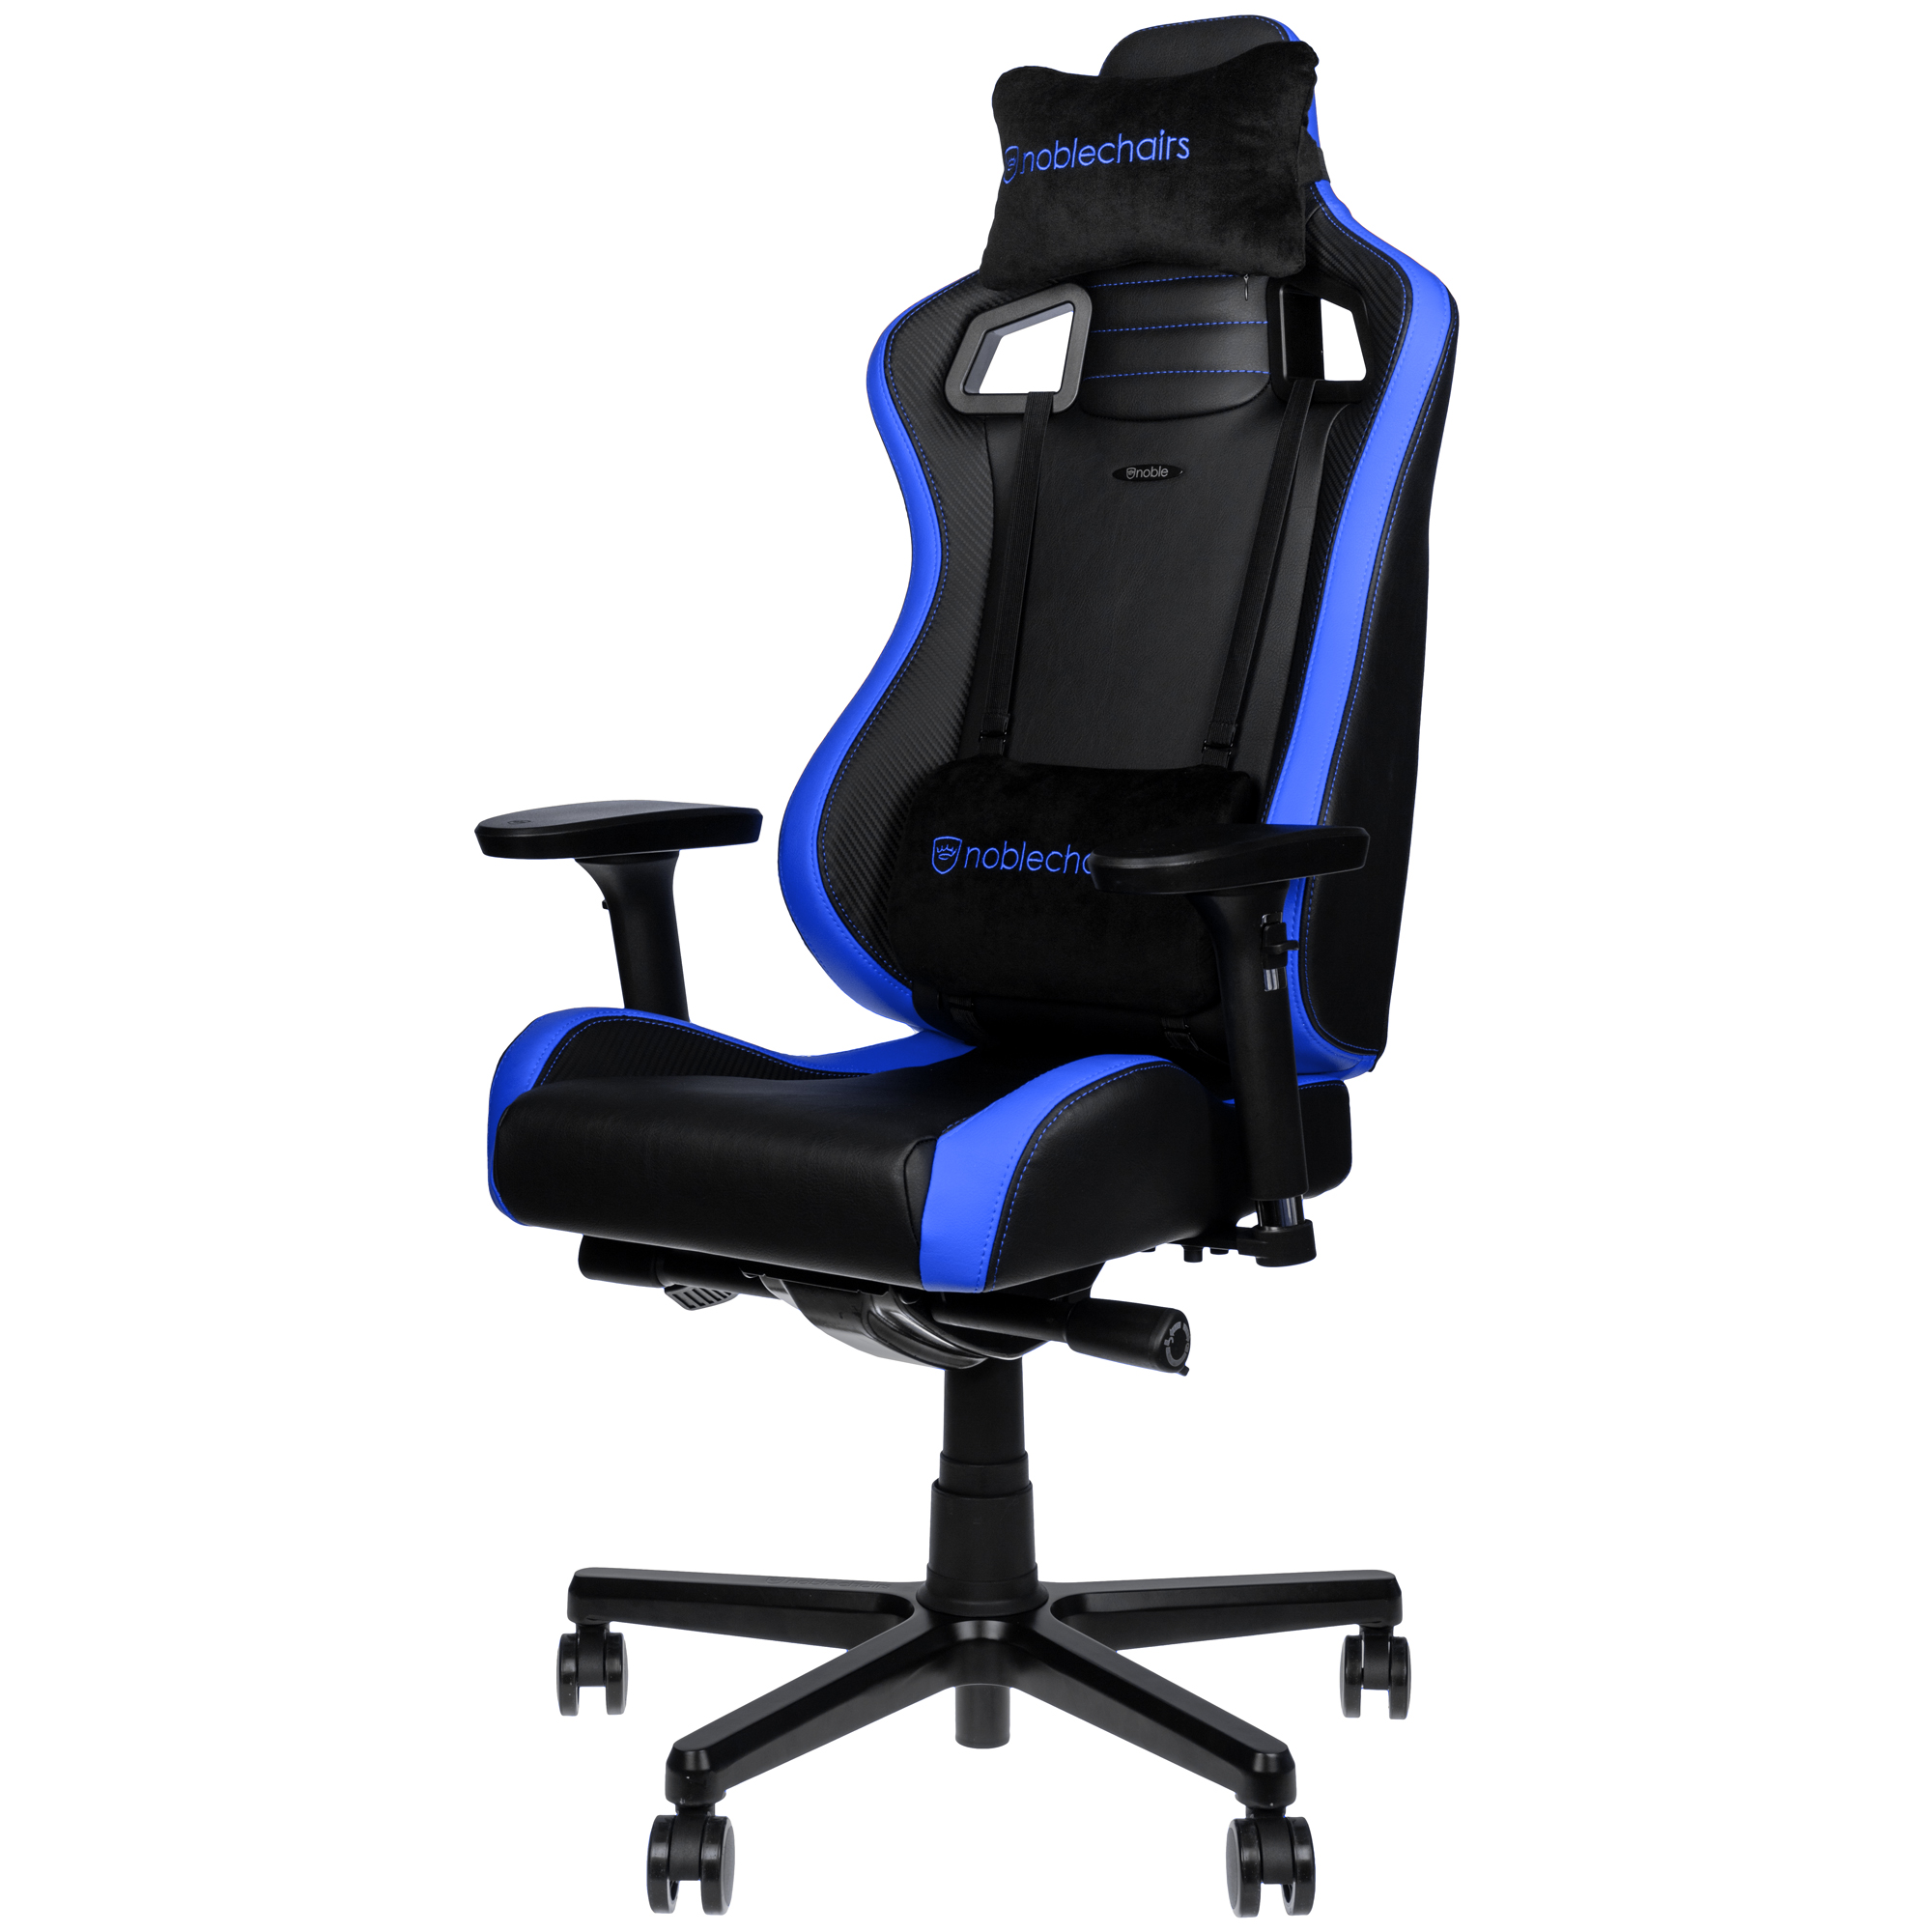 noblechairs EPIC Compact Gaming chair - black/carbon/blue